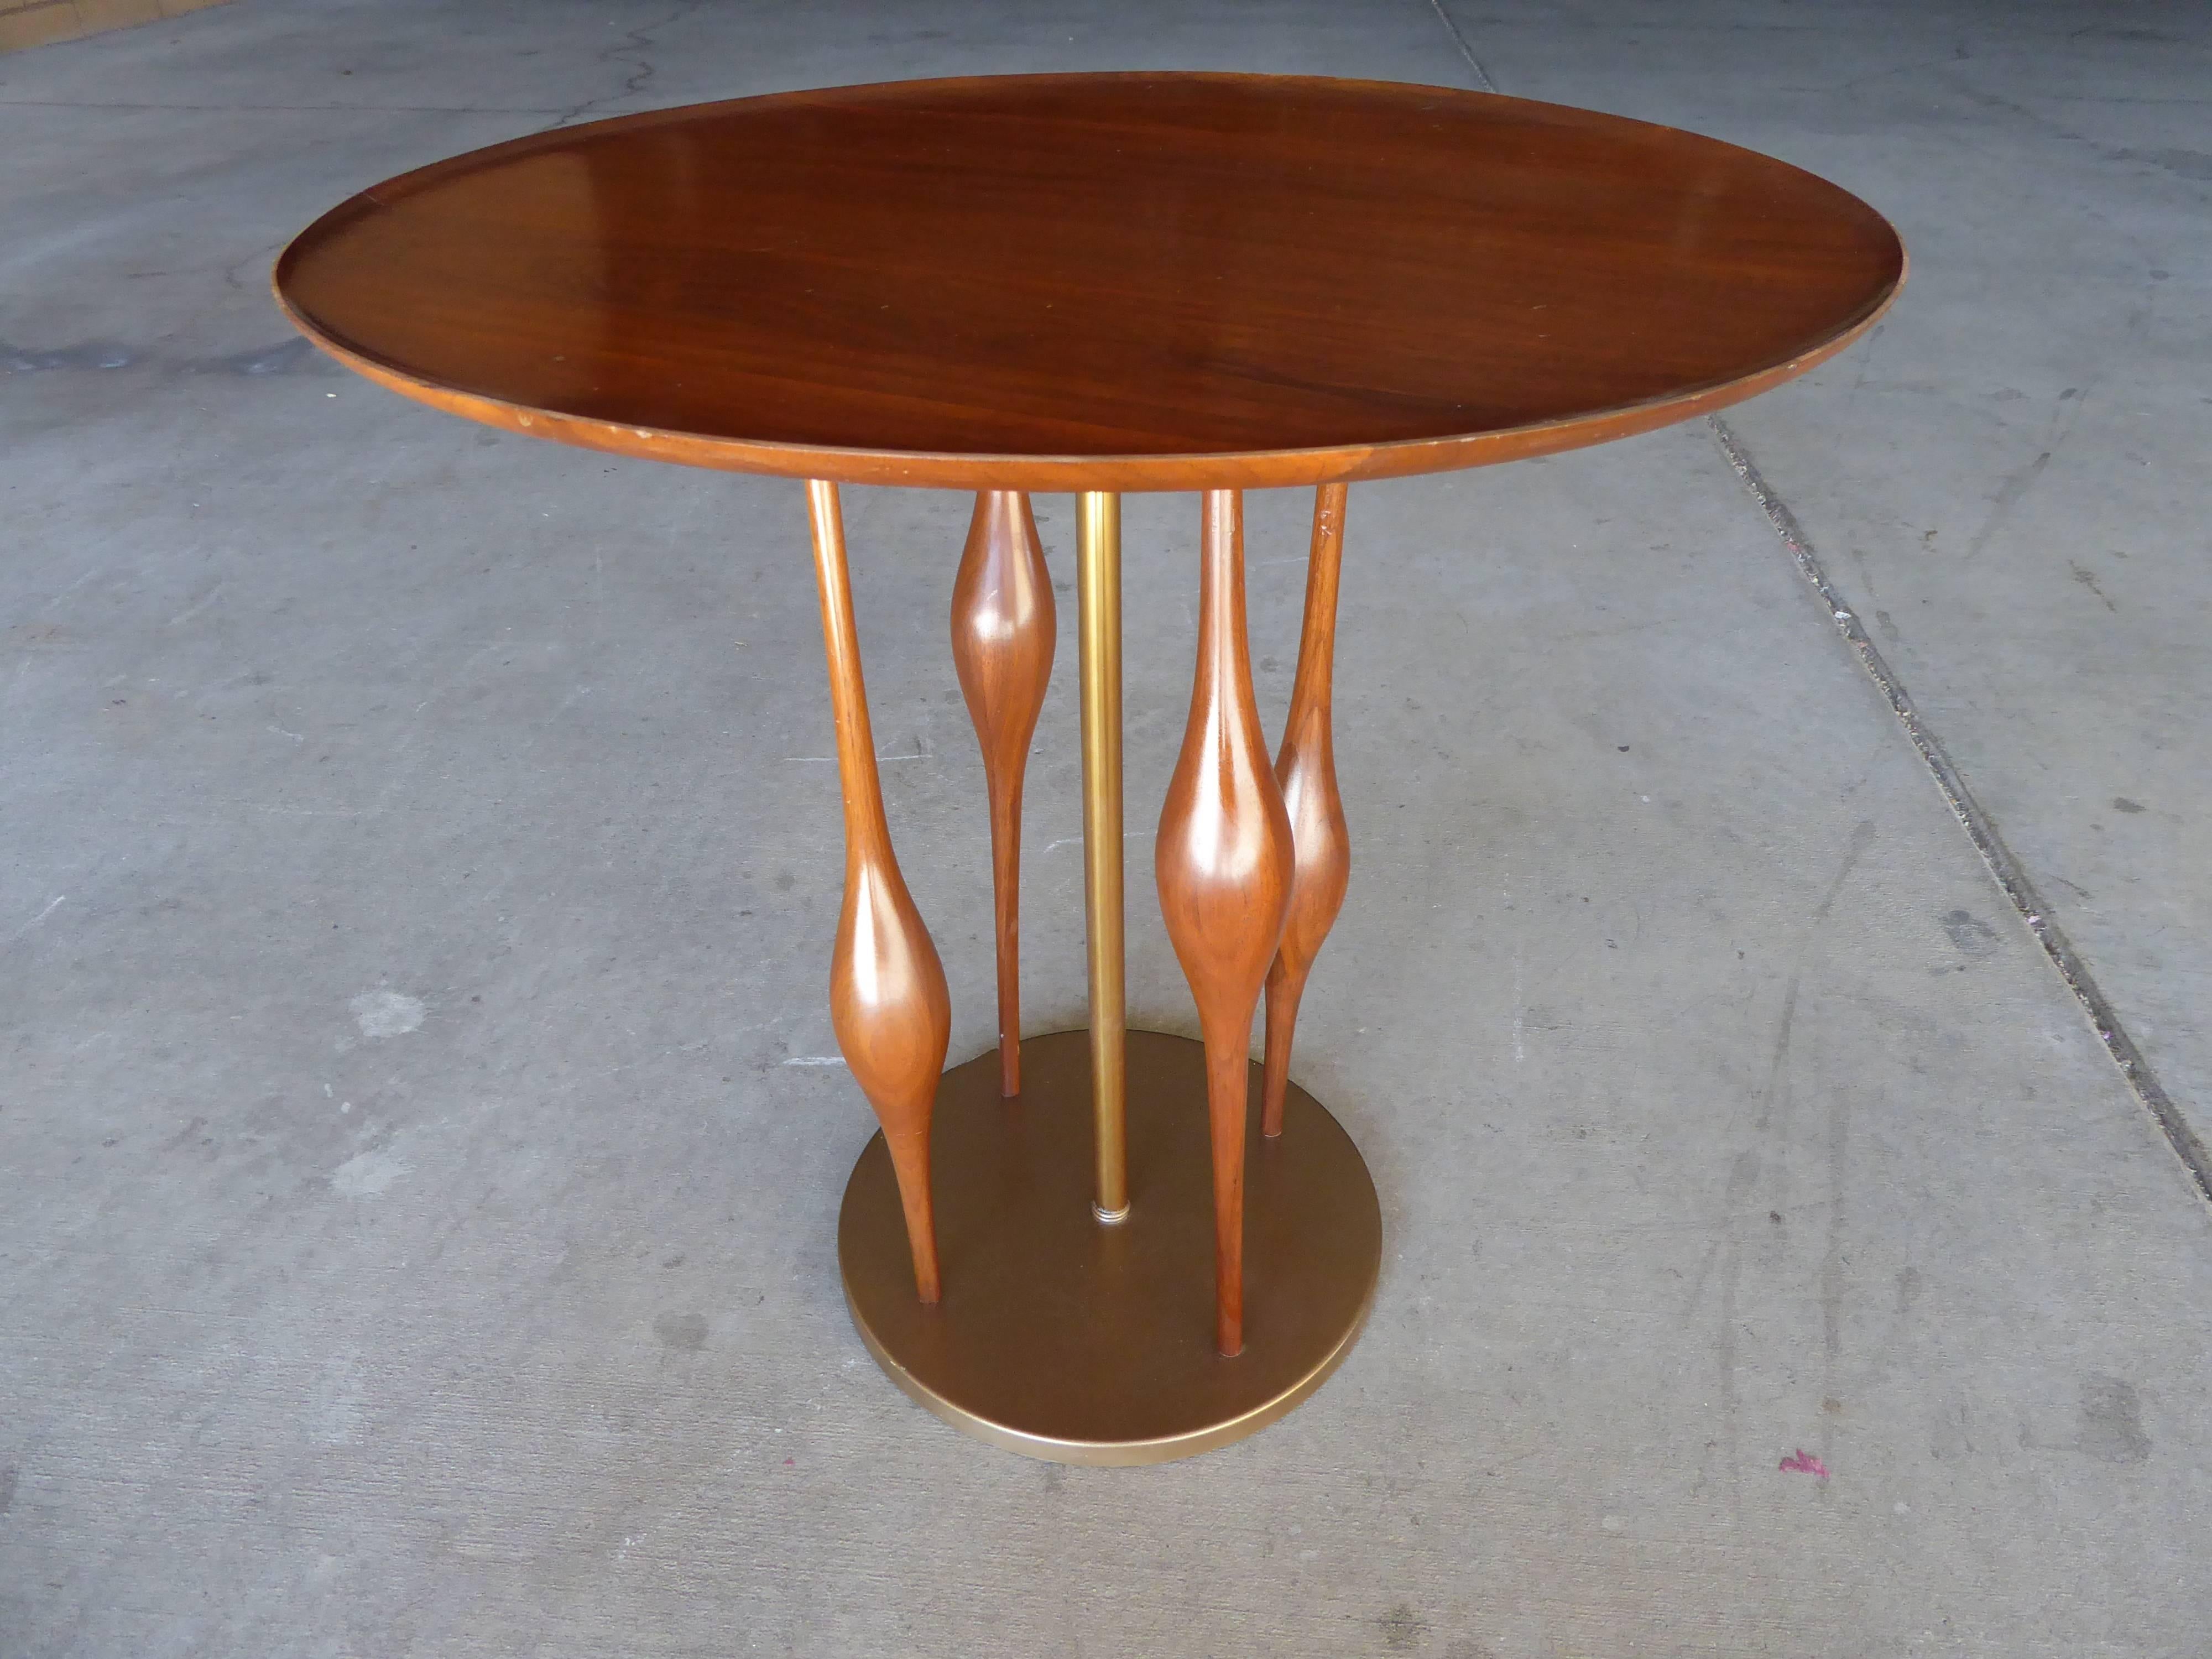 A wonderful and whimsical mahogany side table with a tray top and sculpted spindle supports with a brass center post and base. Manufactured by Mode Line with a design attributed to Adrian Pearsall.